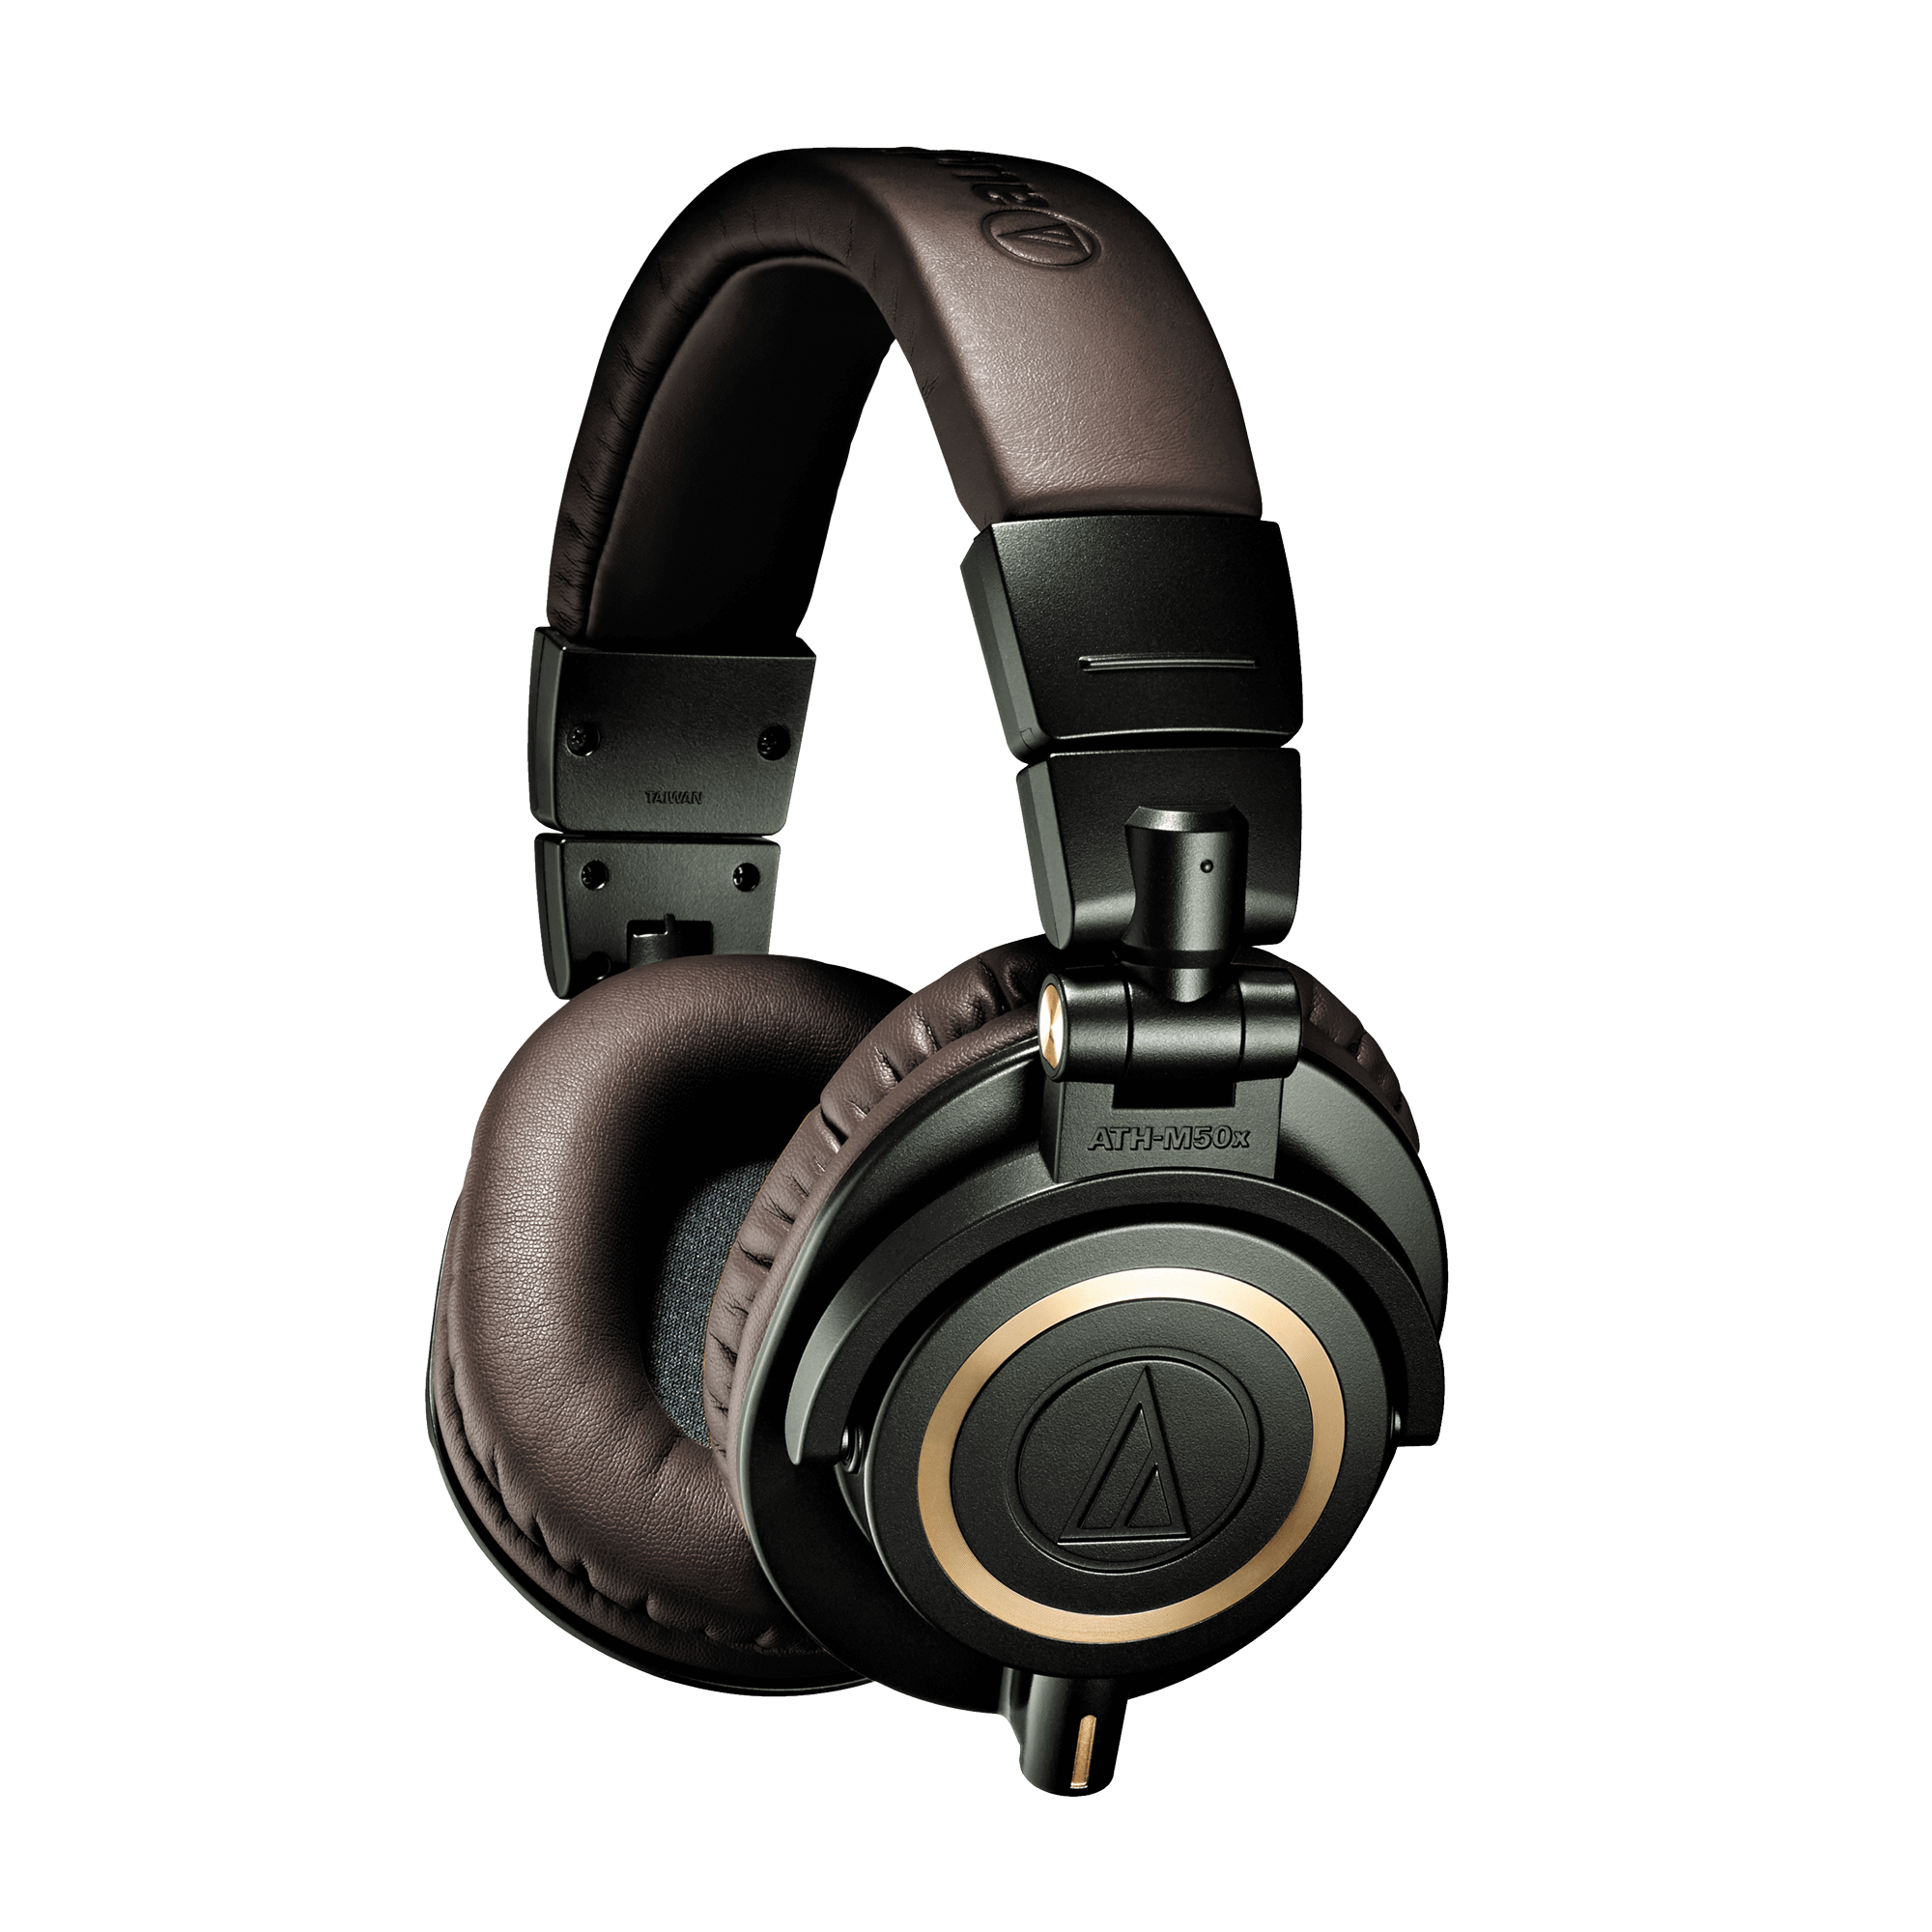 Audio-Technica Releases Limited-Edition ATH-M50x Headphones